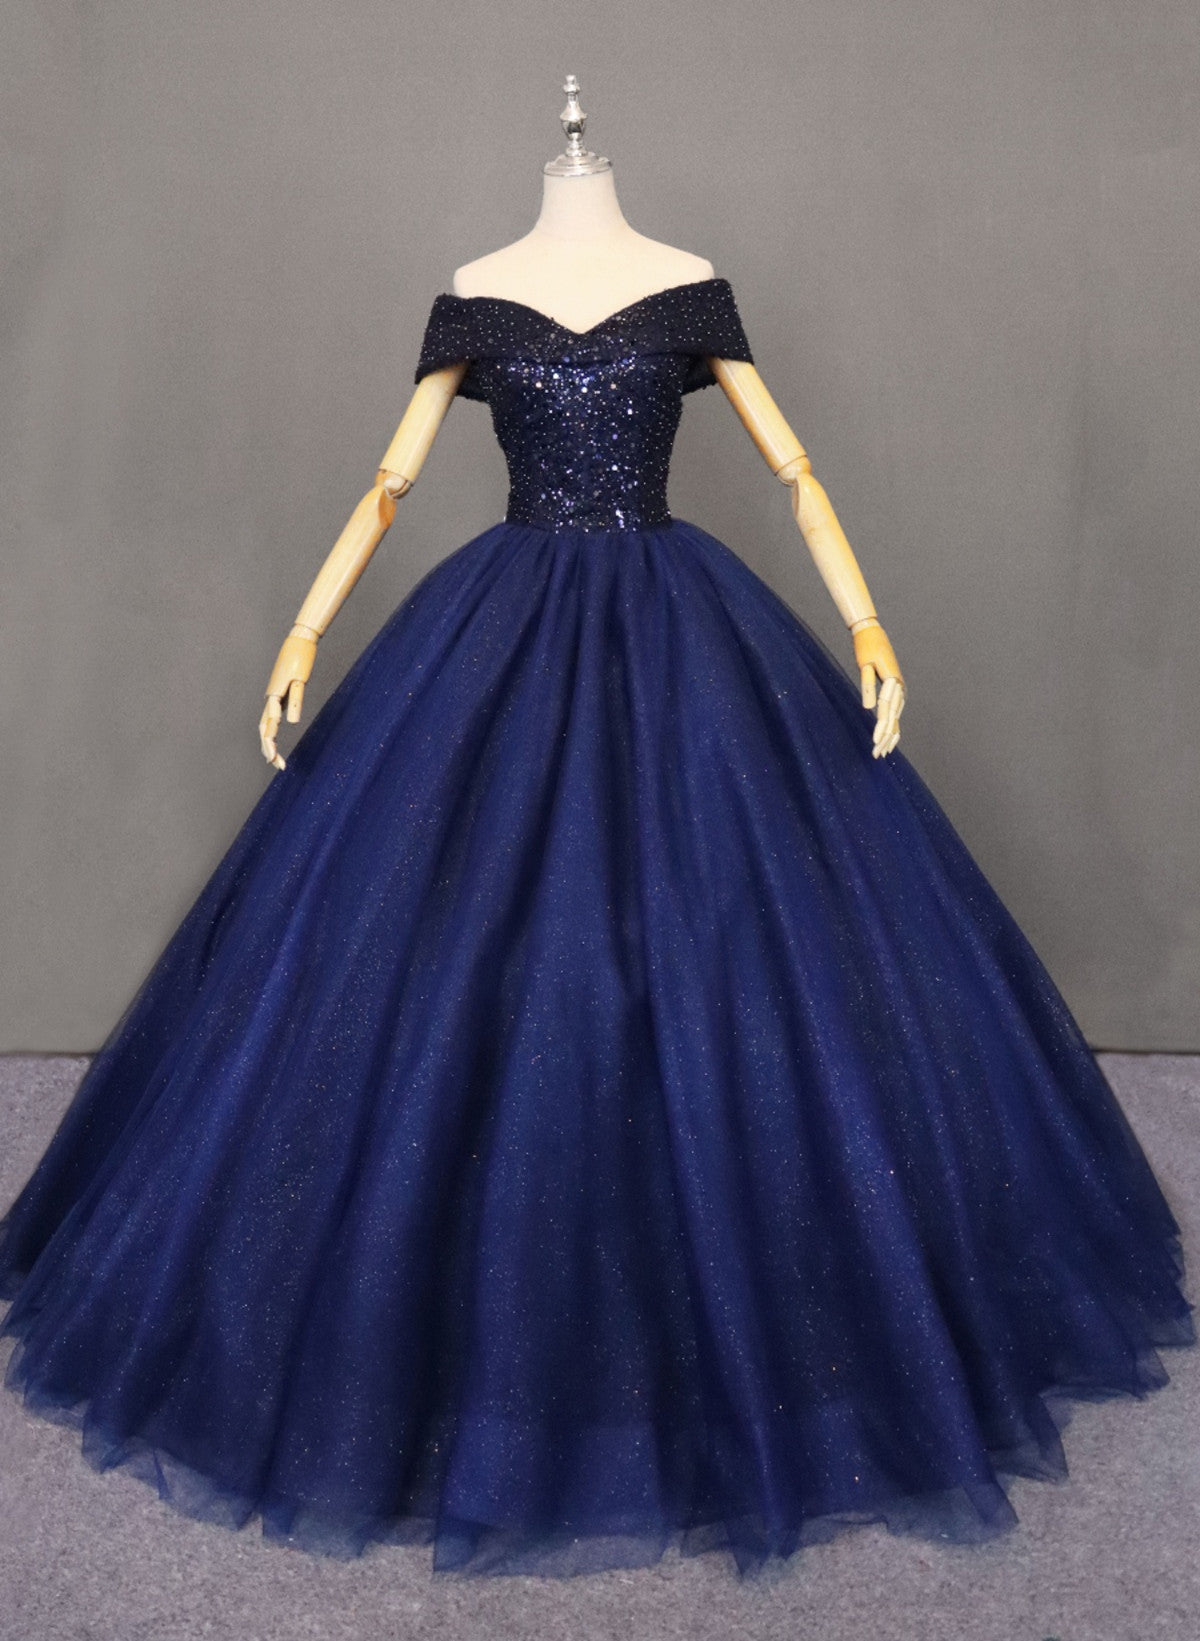 Bridesmaid Dresses Burgundy, Navy Blue Tulle Beaded Ball Gown Sweet 16 Dress, Blue Tulle Prom Dress Party Dress